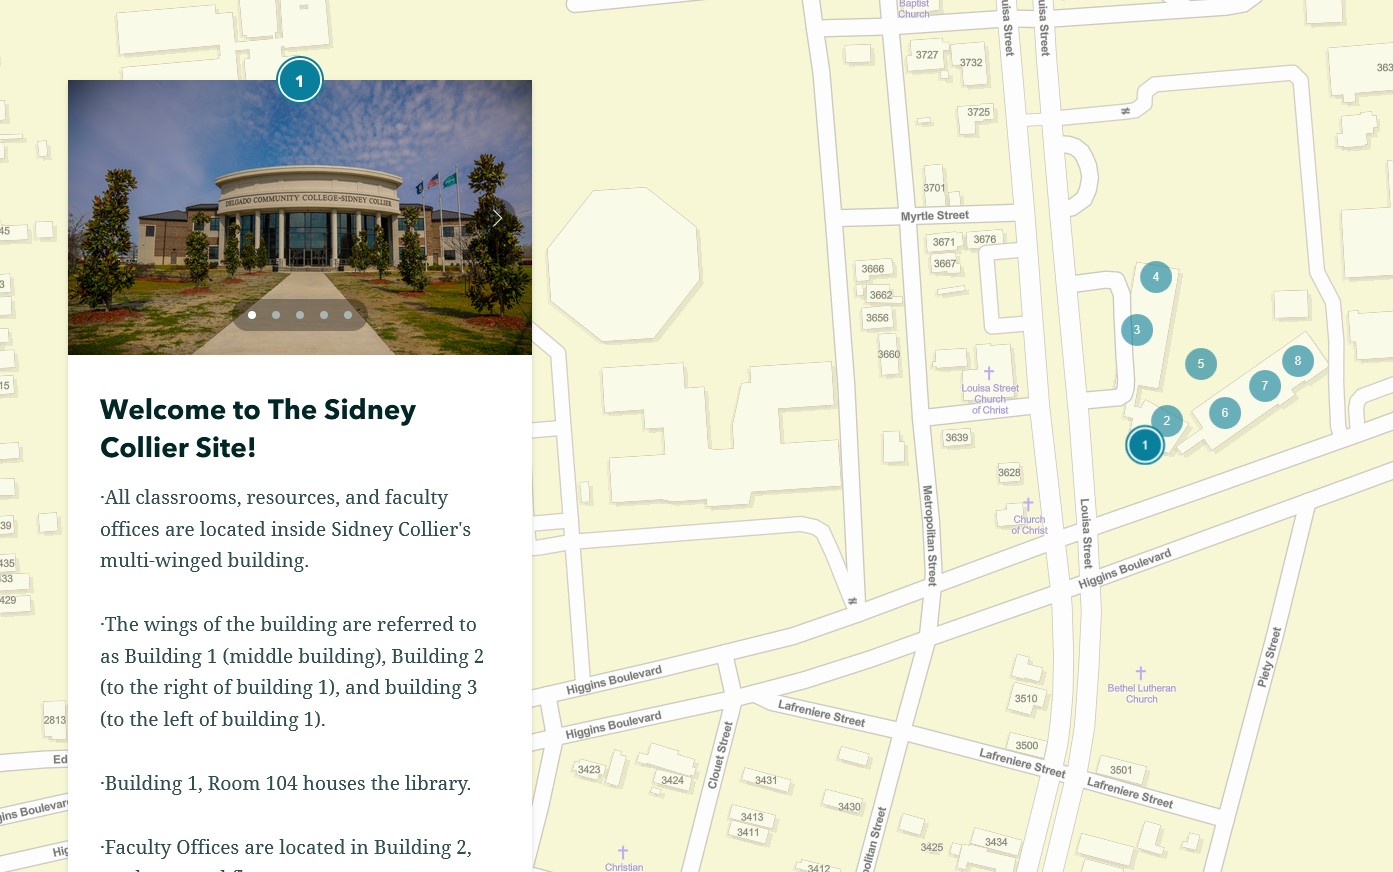 map with locations marked with blue dots and image of building with sidney collier written